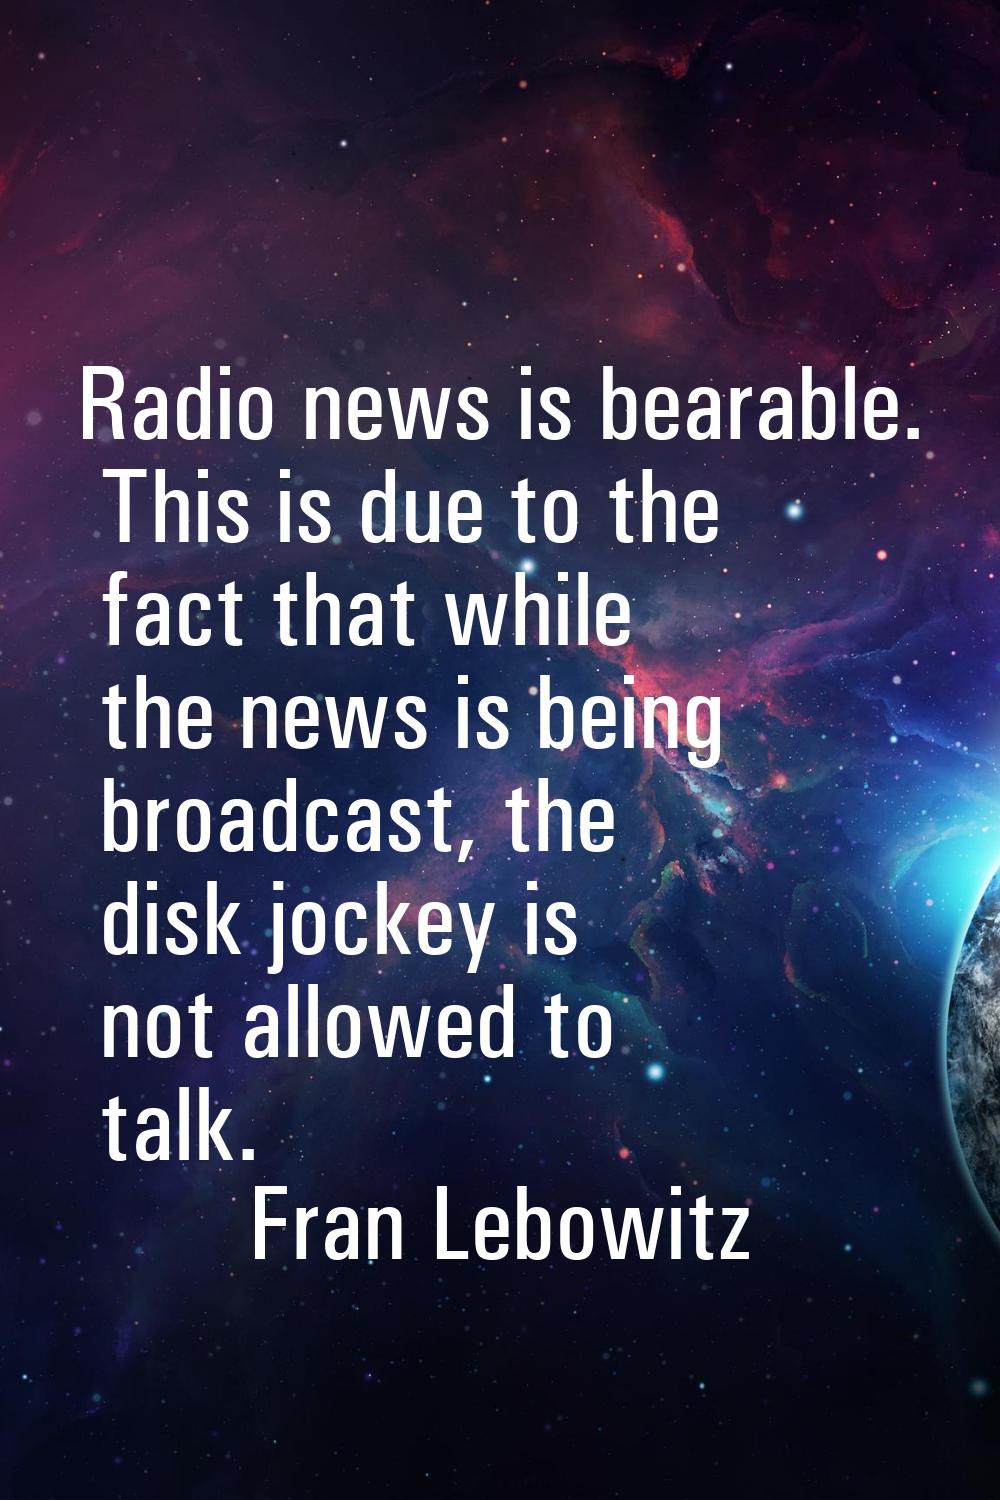 Radio news is bearable. This is due to the fact that while the news is being broadcast, the disk jo